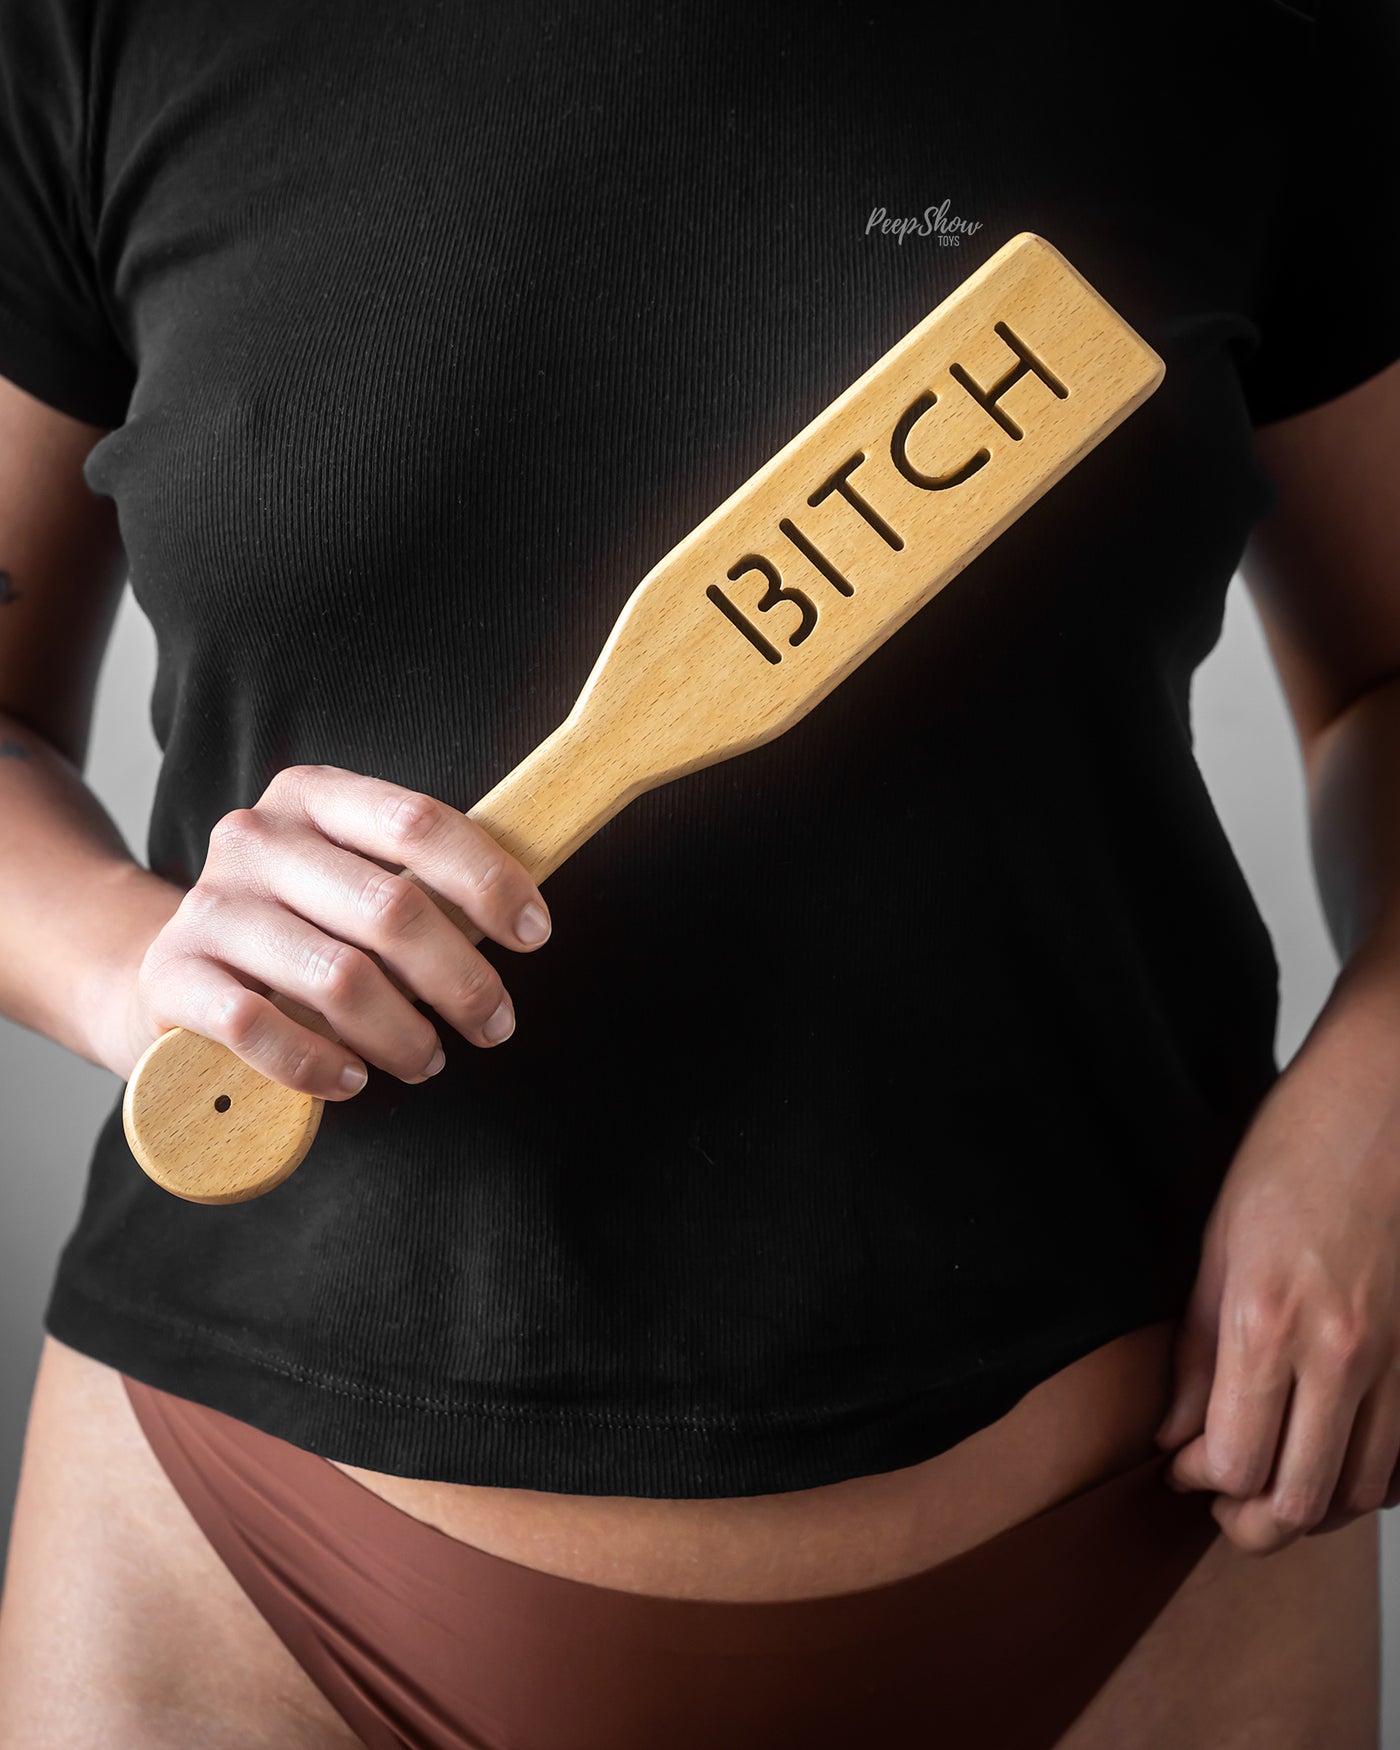 Wooden Paddle with the word "BITCH" Peepshow Toys